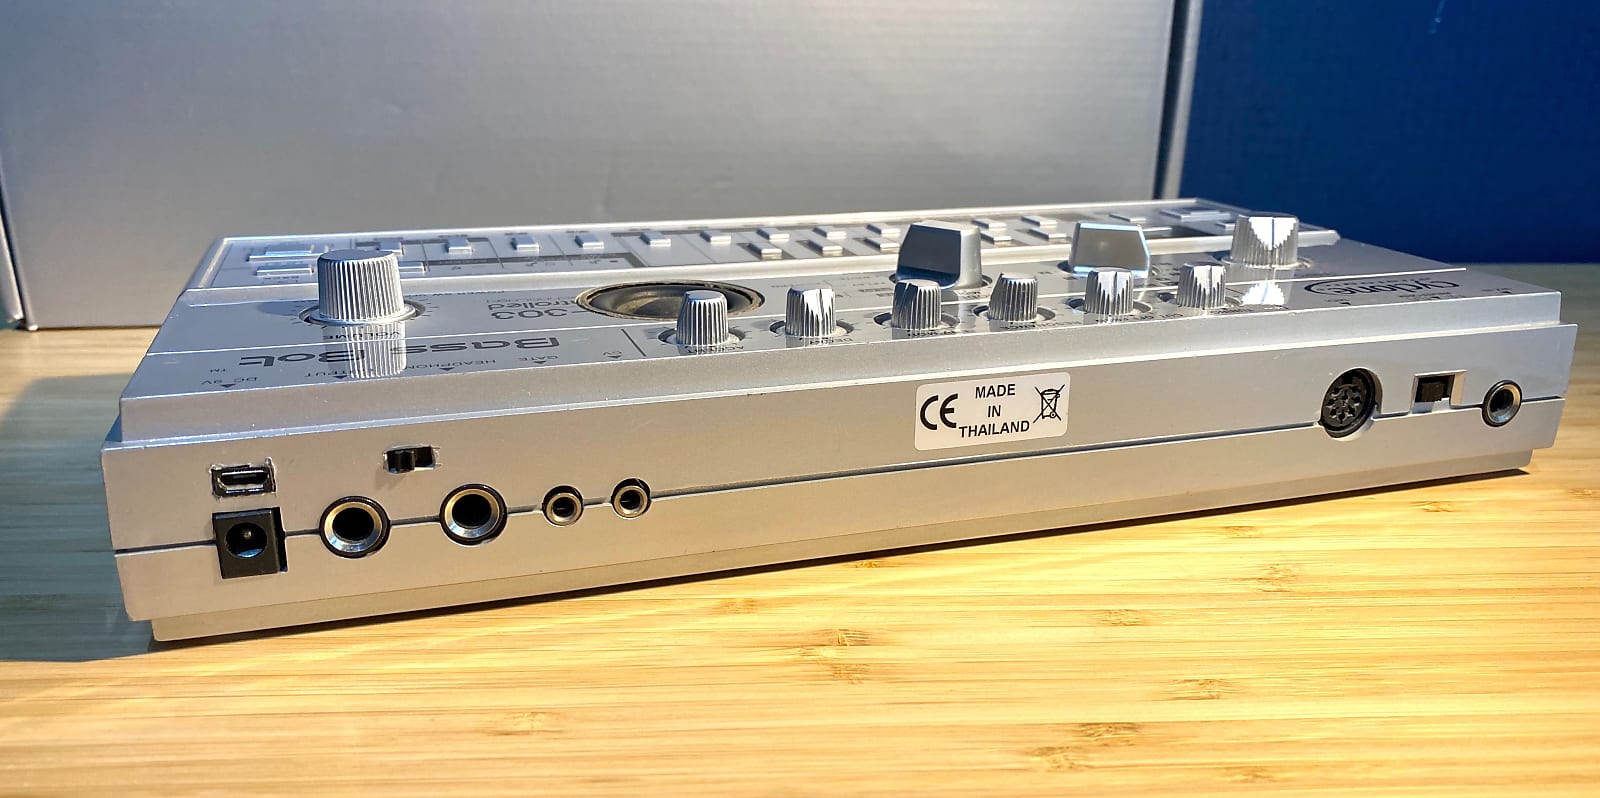 Transformateur TT-303 V1 - Cyclone analogic Official Store